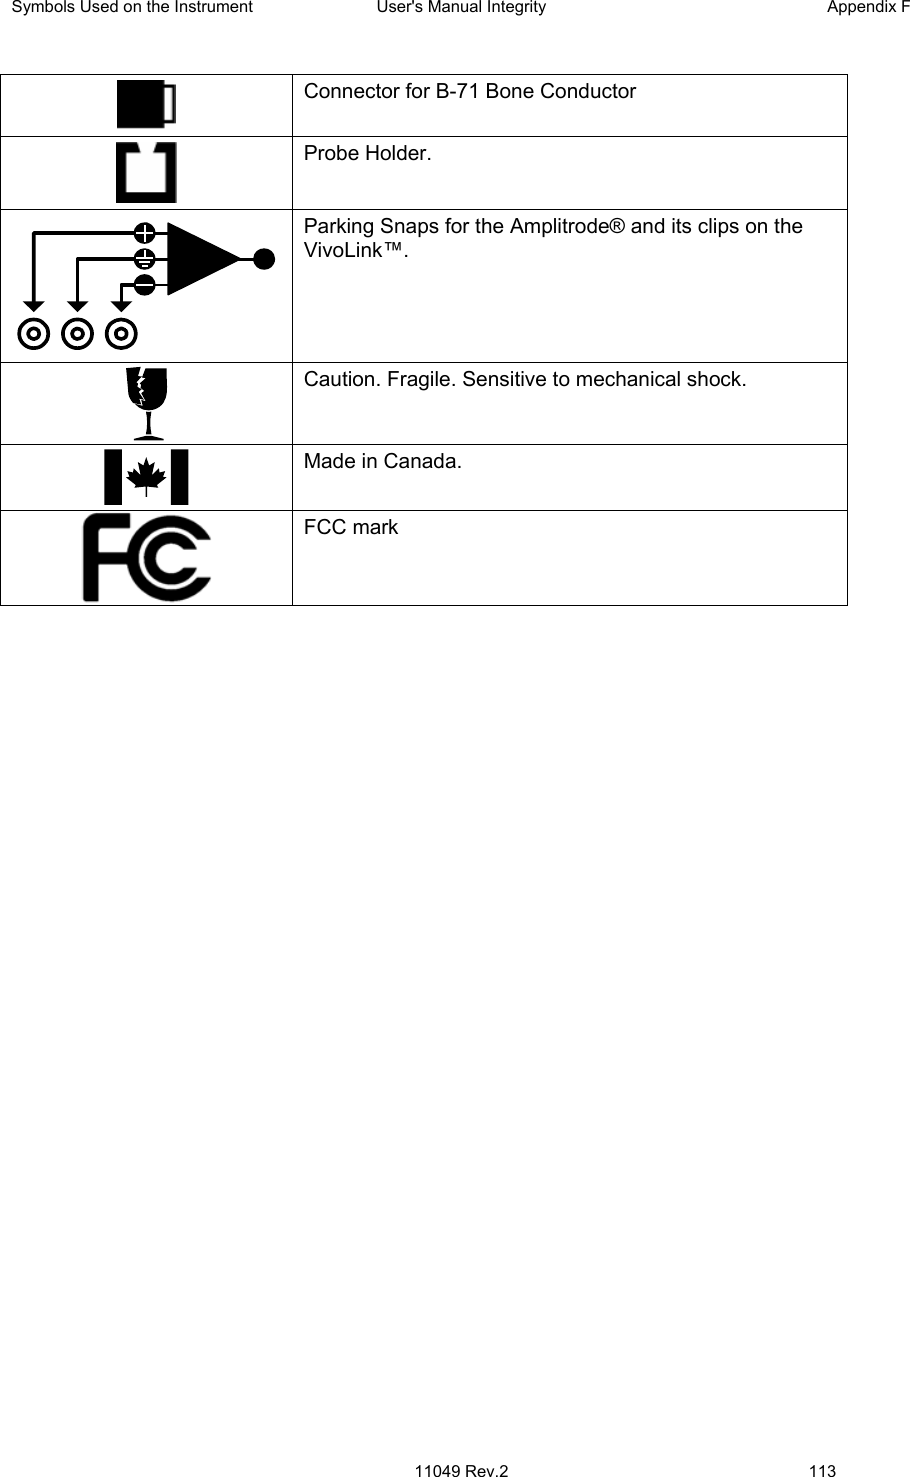 Symbols Used on the Instrument  User&apos;s Manual Integrity  Appendix F  11049 Rev.2 113    Connector for B-71 Bone Conductor  Probe Holder. Parking Snaps for the Amplitrode® and its clips on the VivoLink™.  Caution. Fragile. Sensitive to mechanical shock.  Made in Canada.  FCC mark  